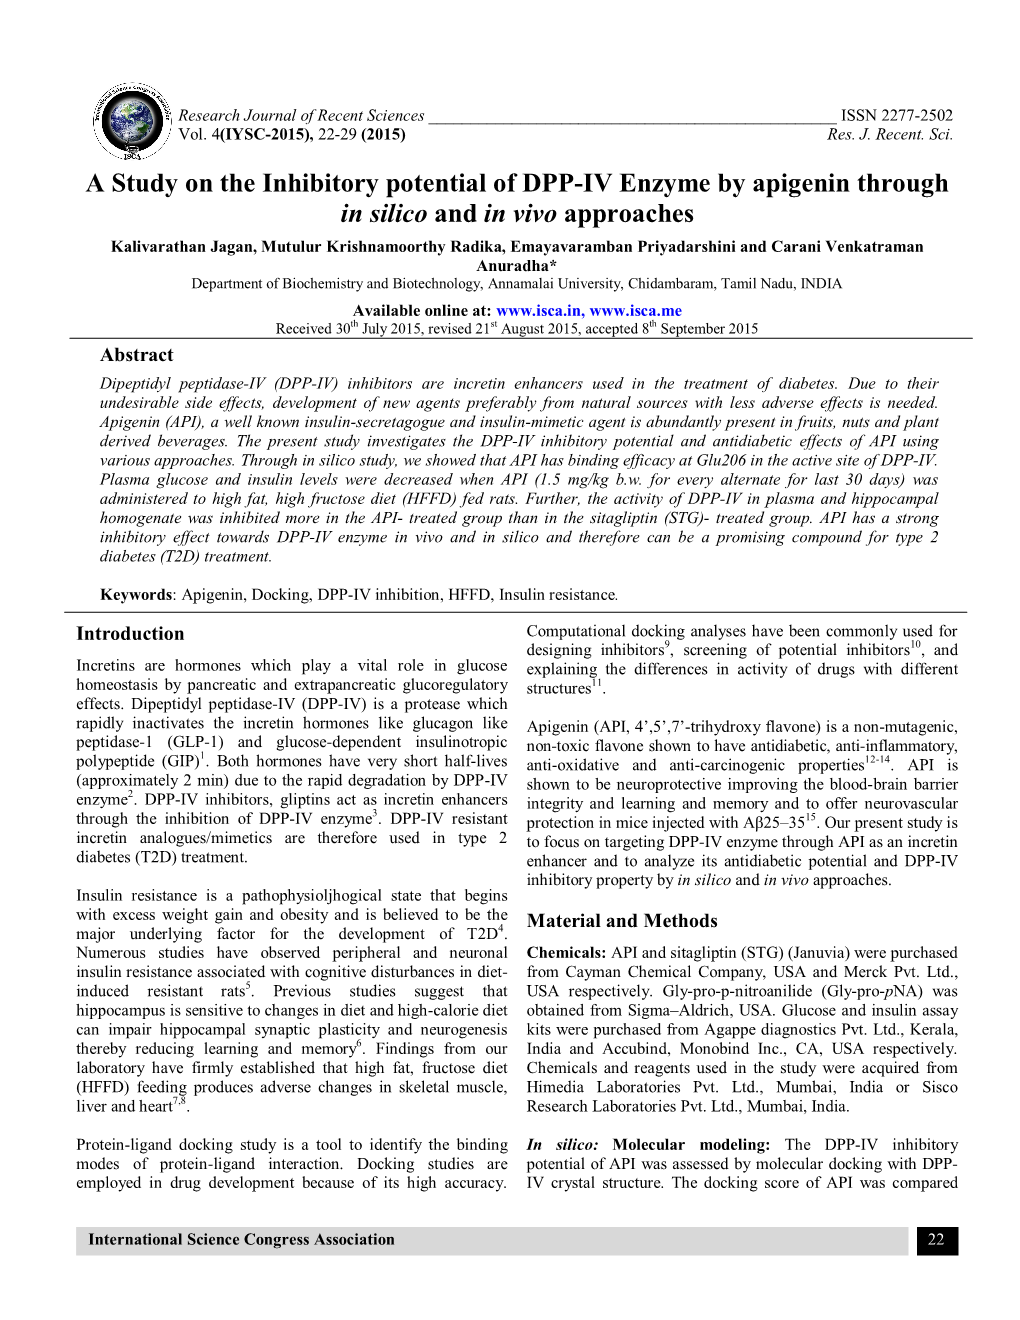 A Study on the Inhibitory Potential of DPP-IV Enzyme by Apigenin